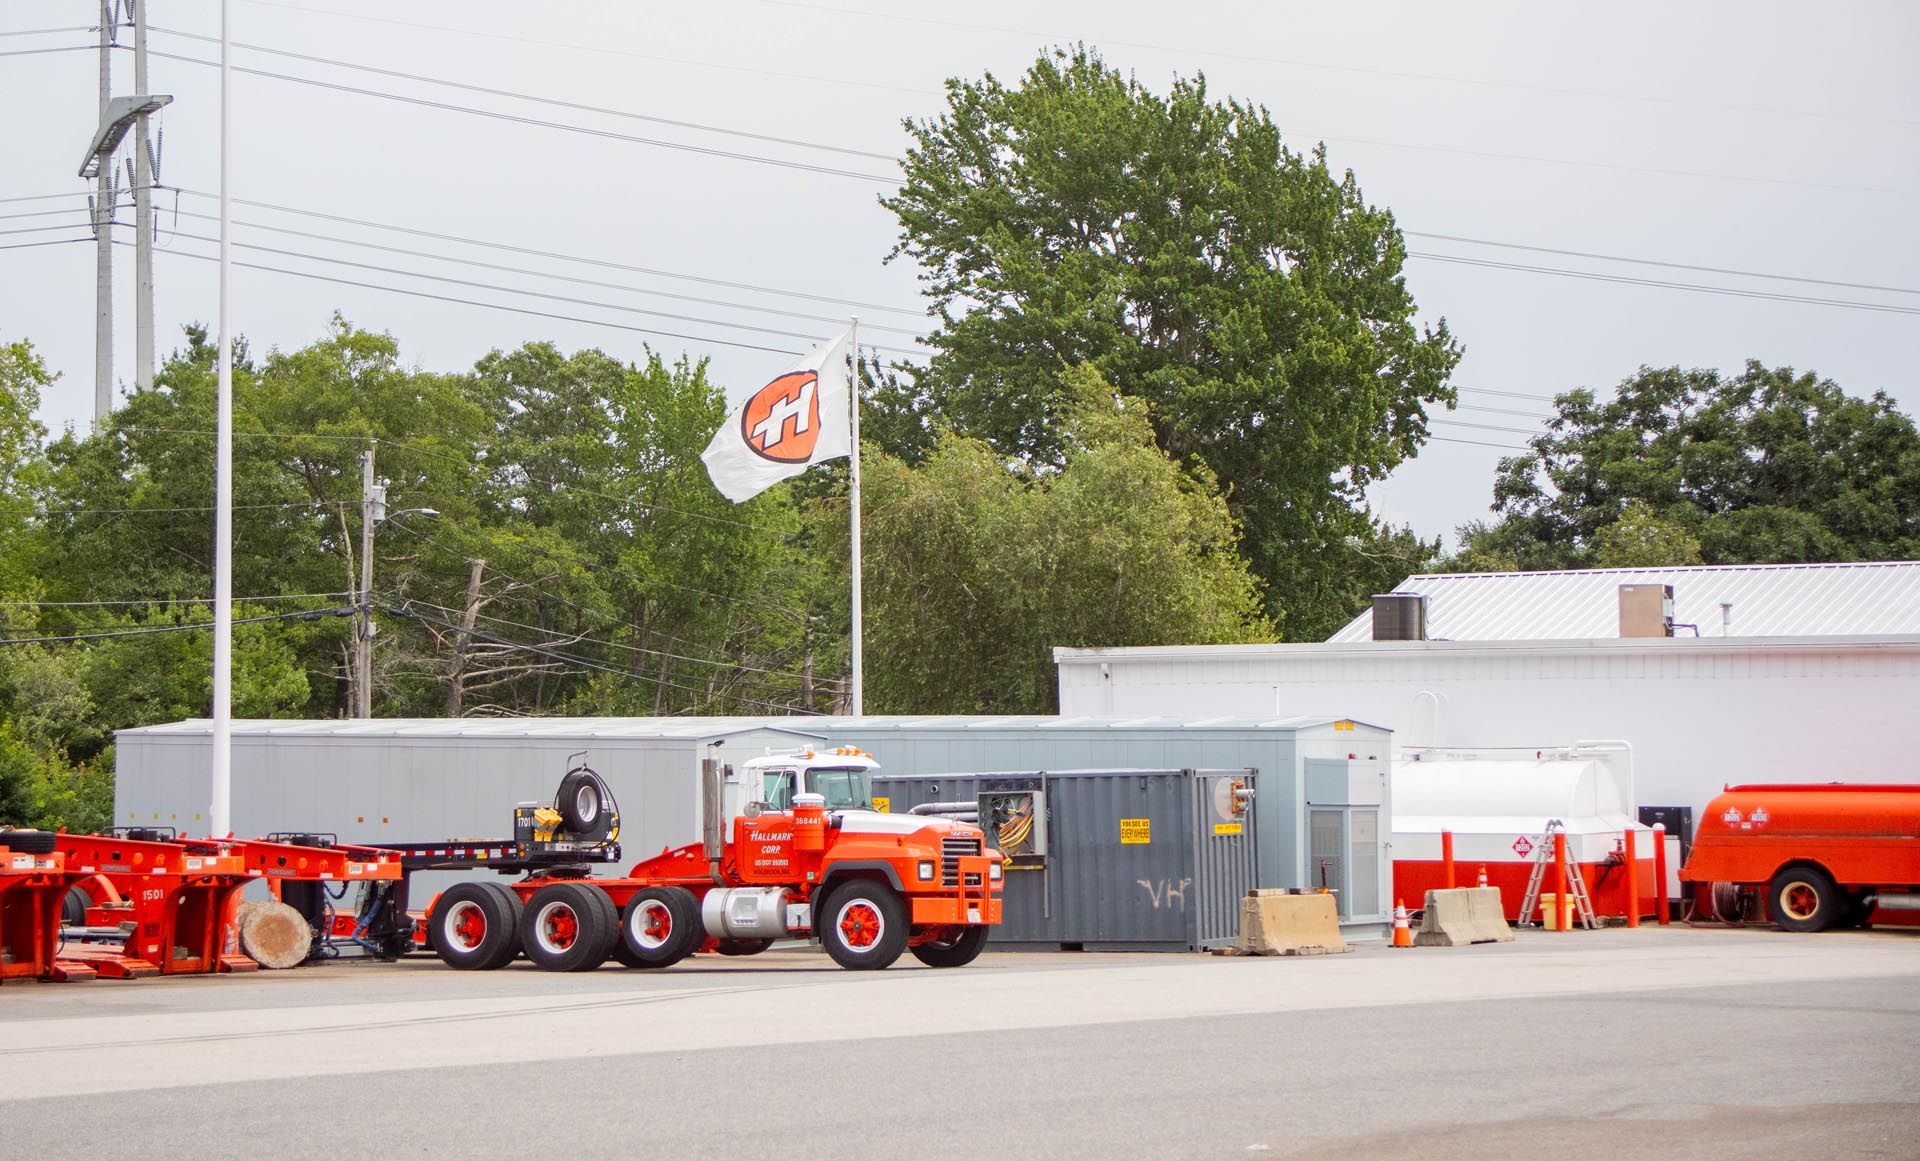 Hallamore Corporation offers commercial 3PL Warehousing services throughout New England.